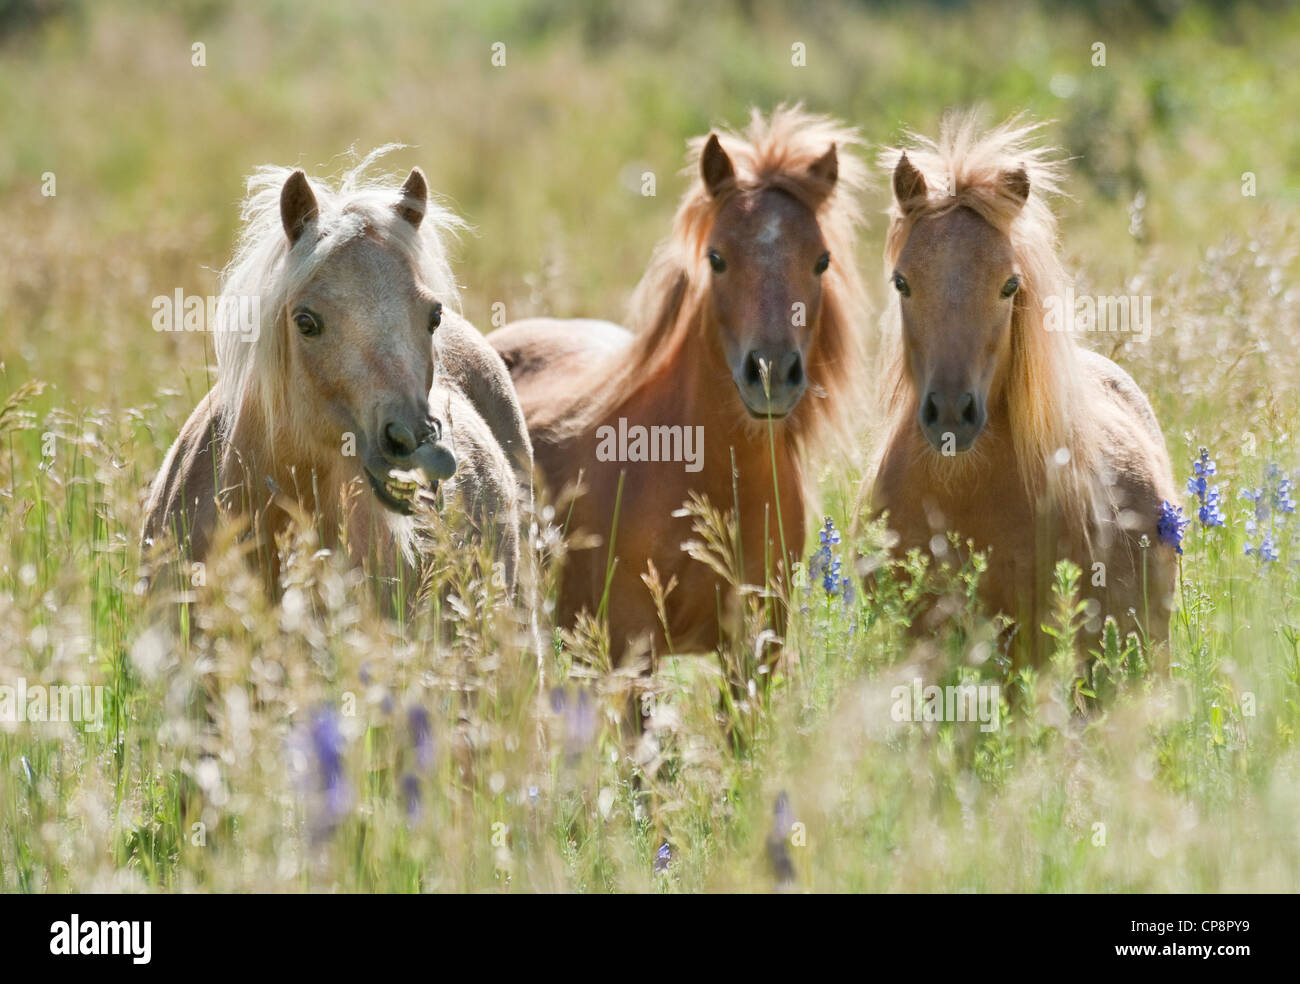 Miniature horse mares in field of tall grasses Stock Photo